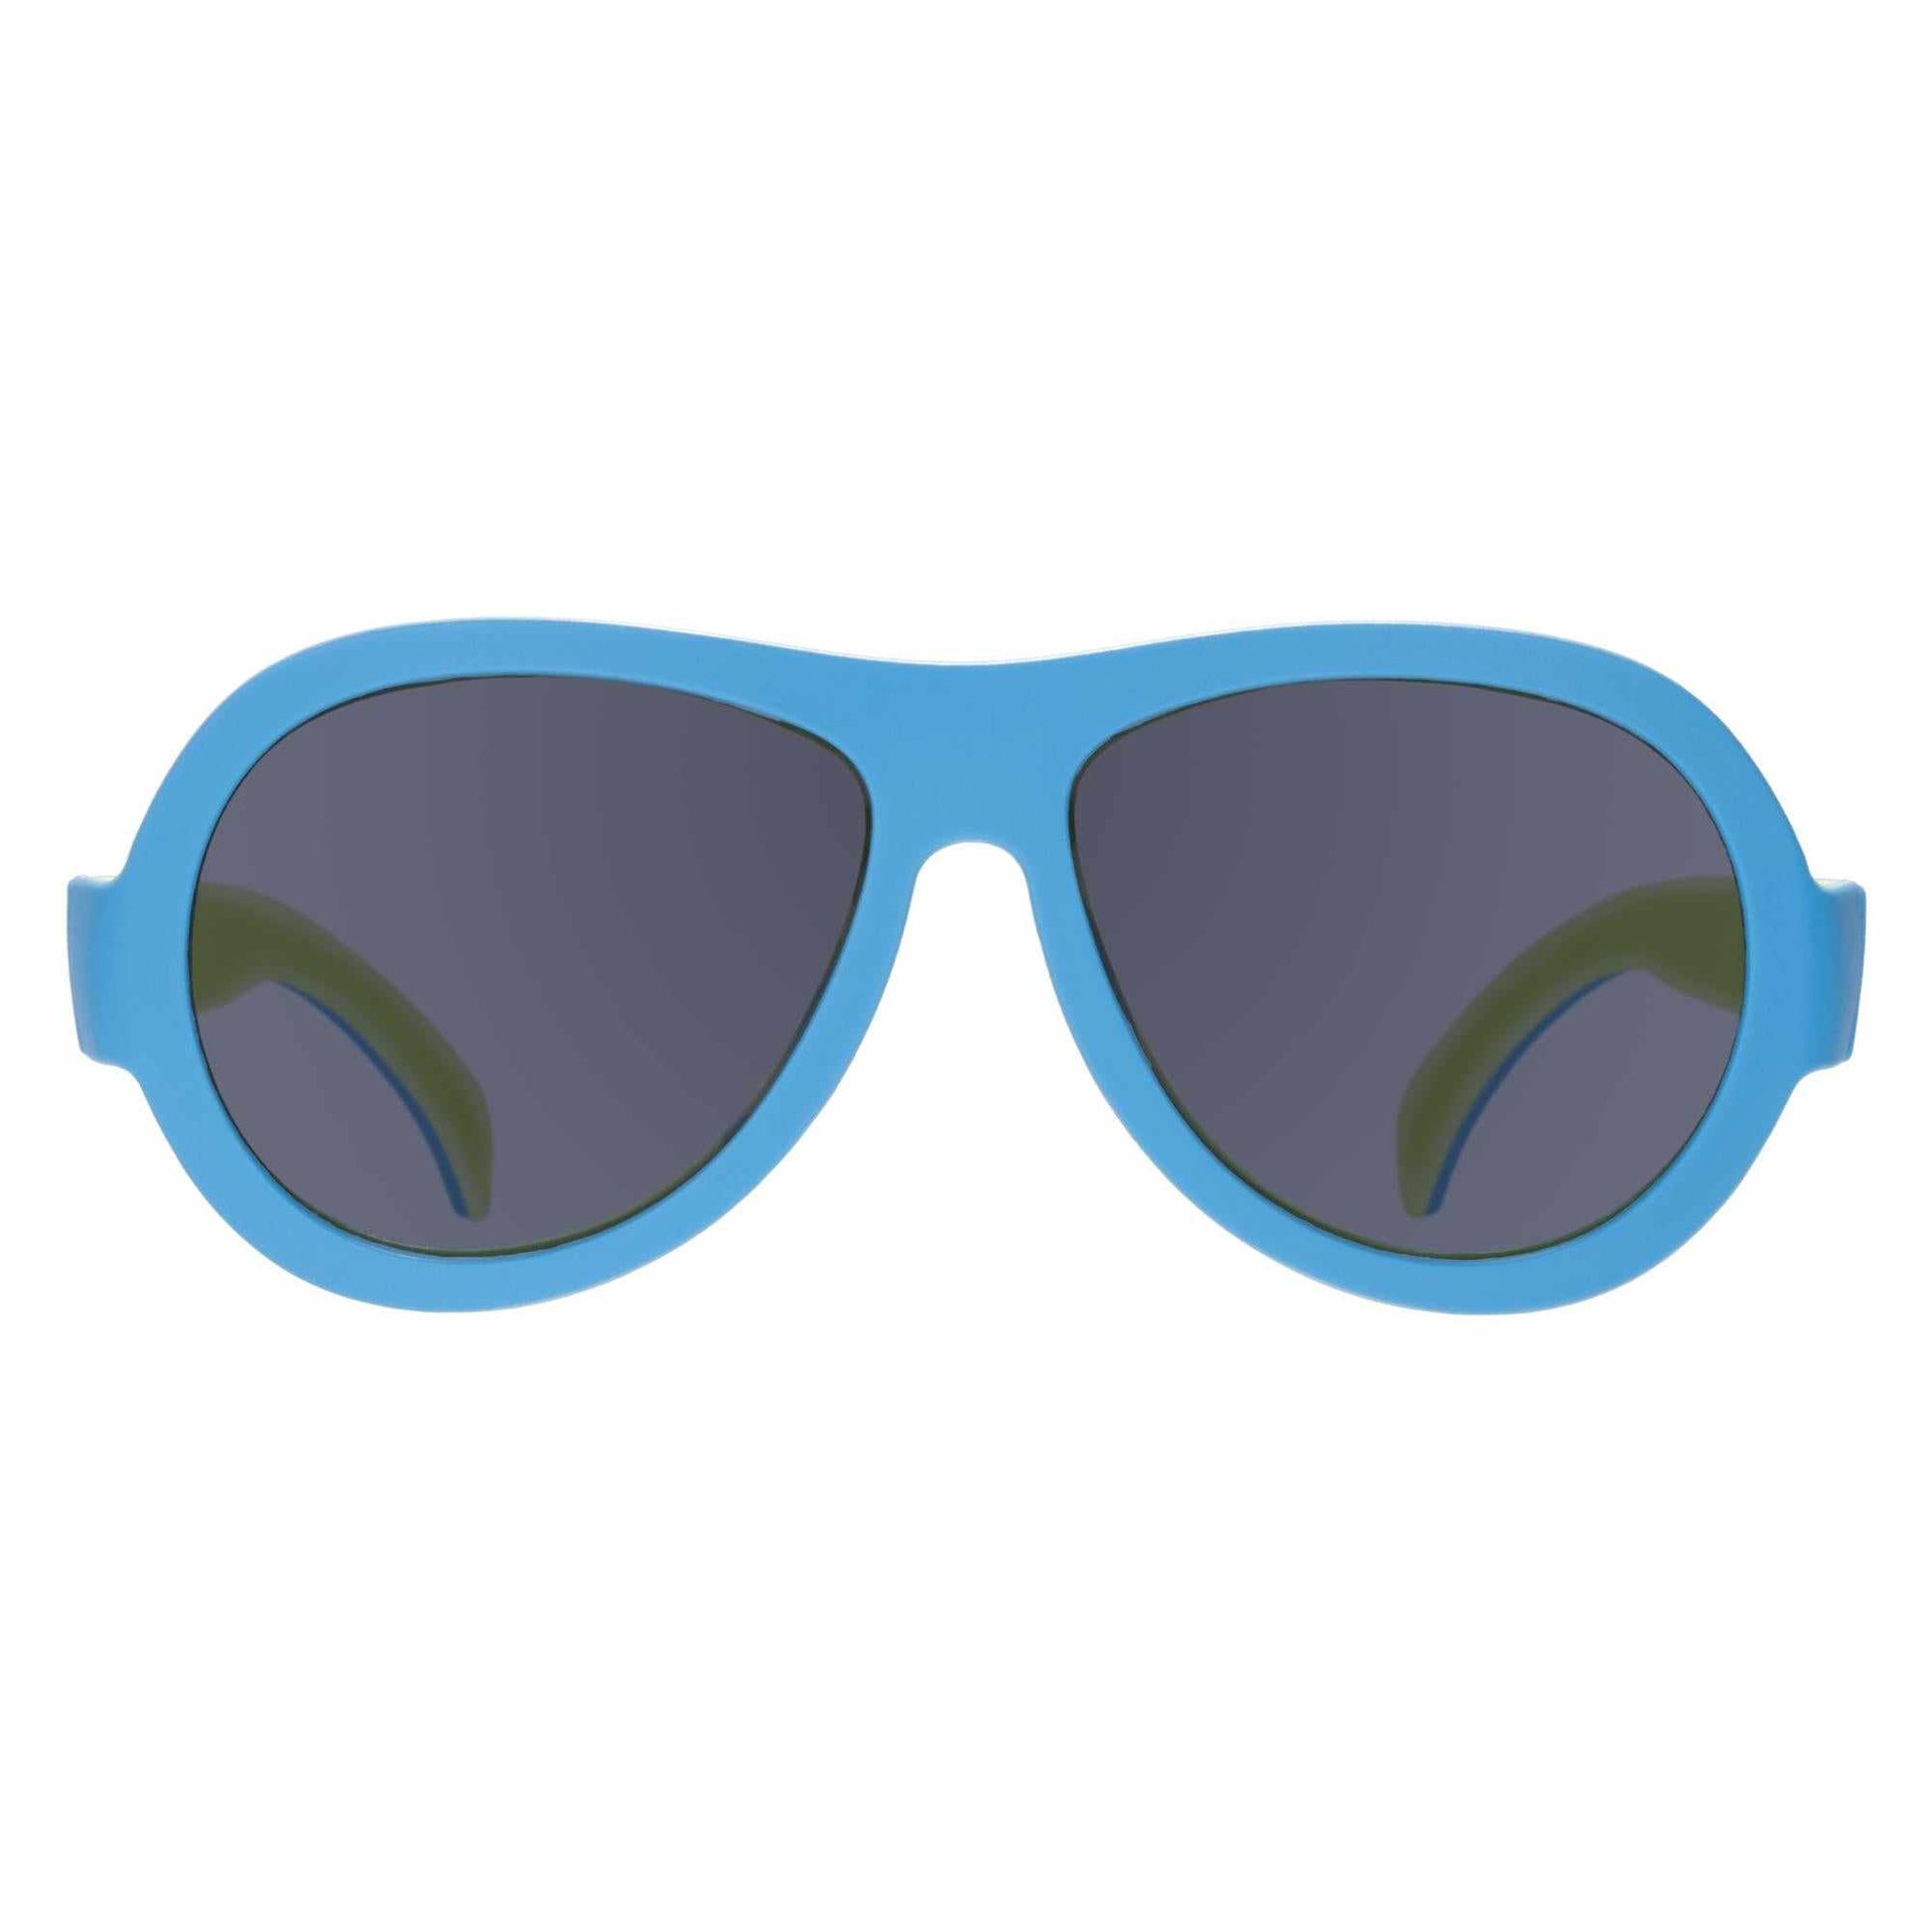 Two-toned Aviator/Non-polarized Sunglasses "The Limelight"